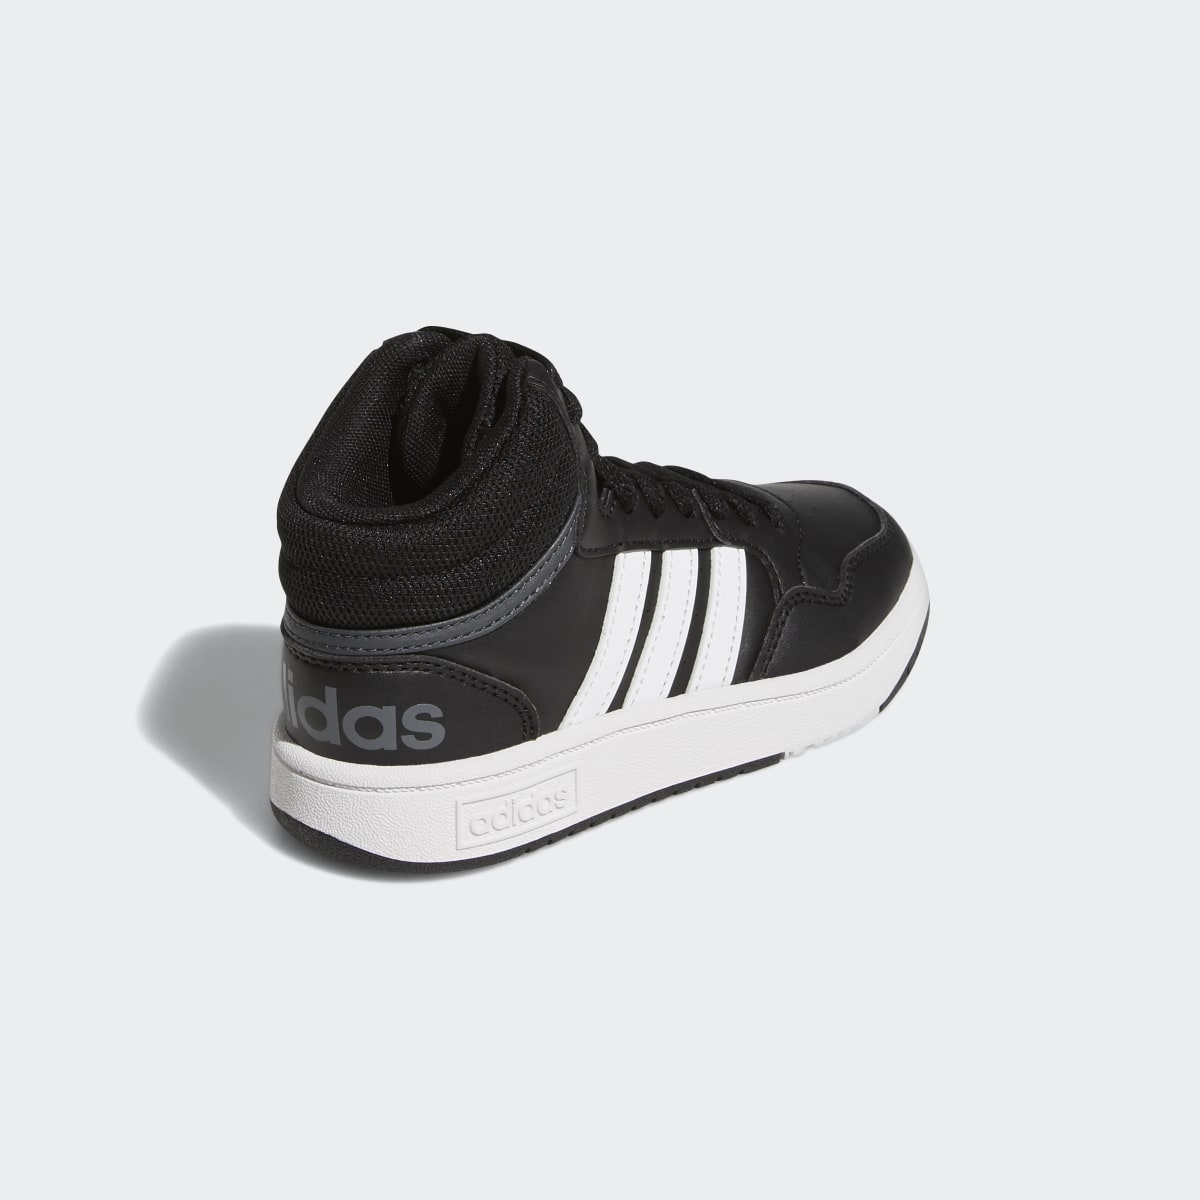 Adidas Hoops Mid Shoes. 6